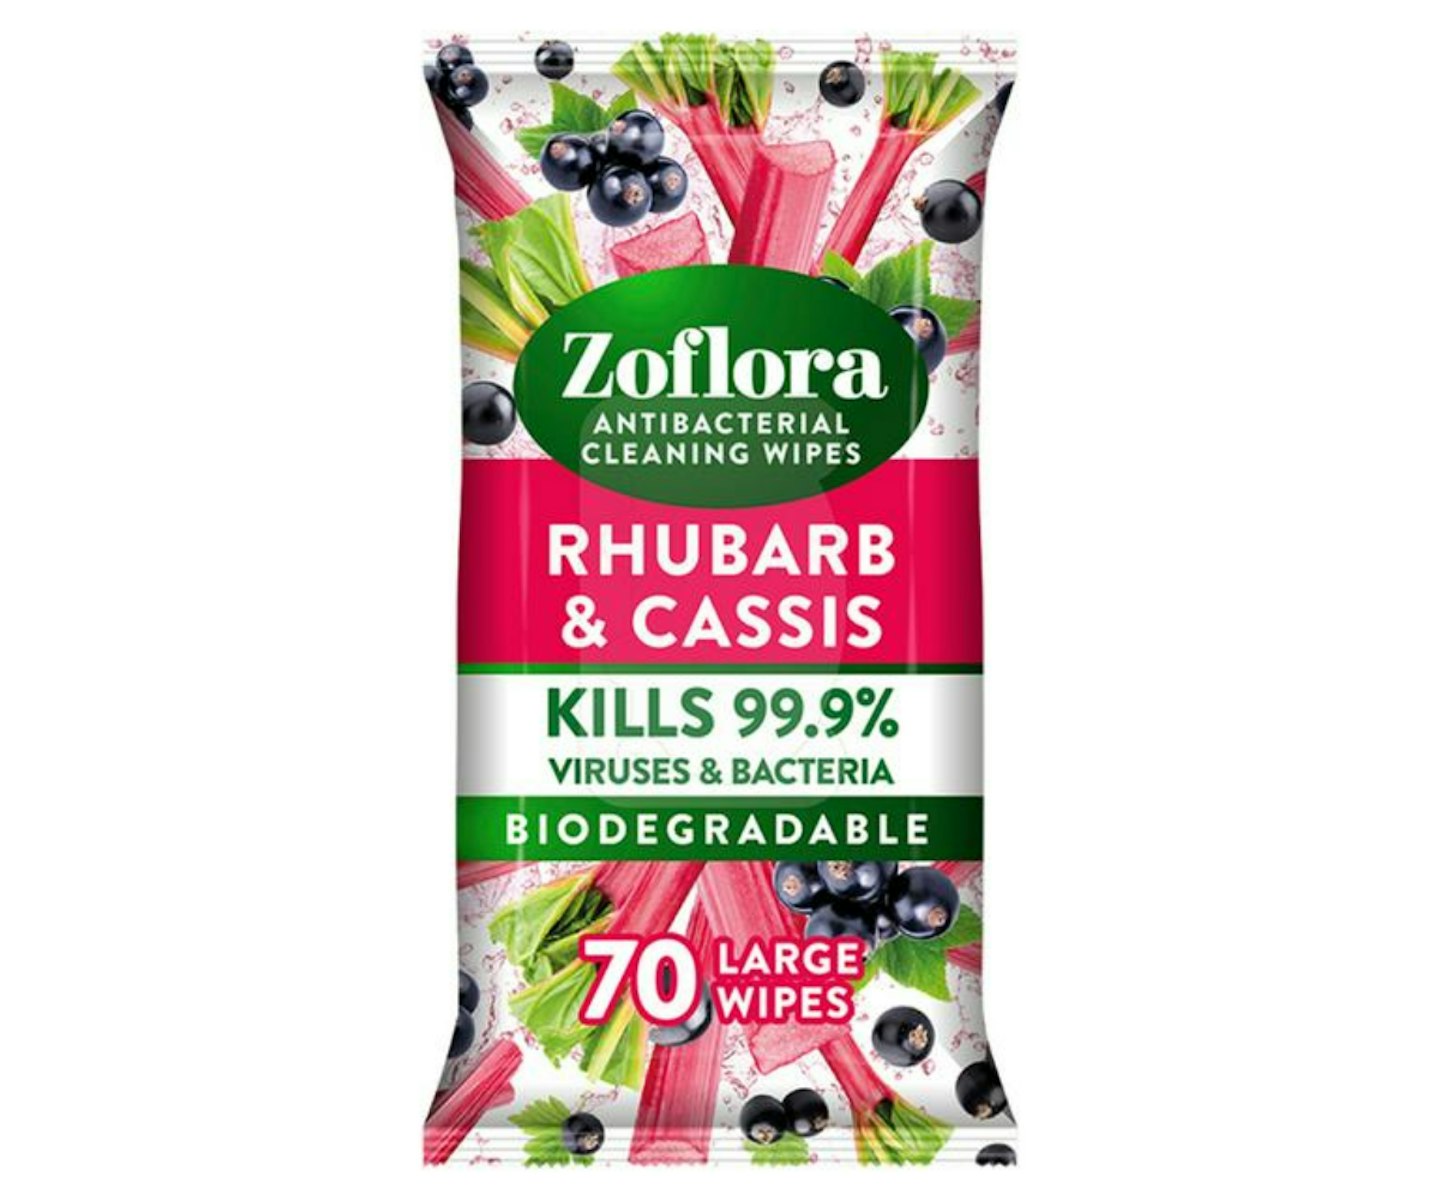 Zoflora Antibacterial Multi-Surface Cleaning Wipes Rhubarb & Cassis 70 Large Wipes